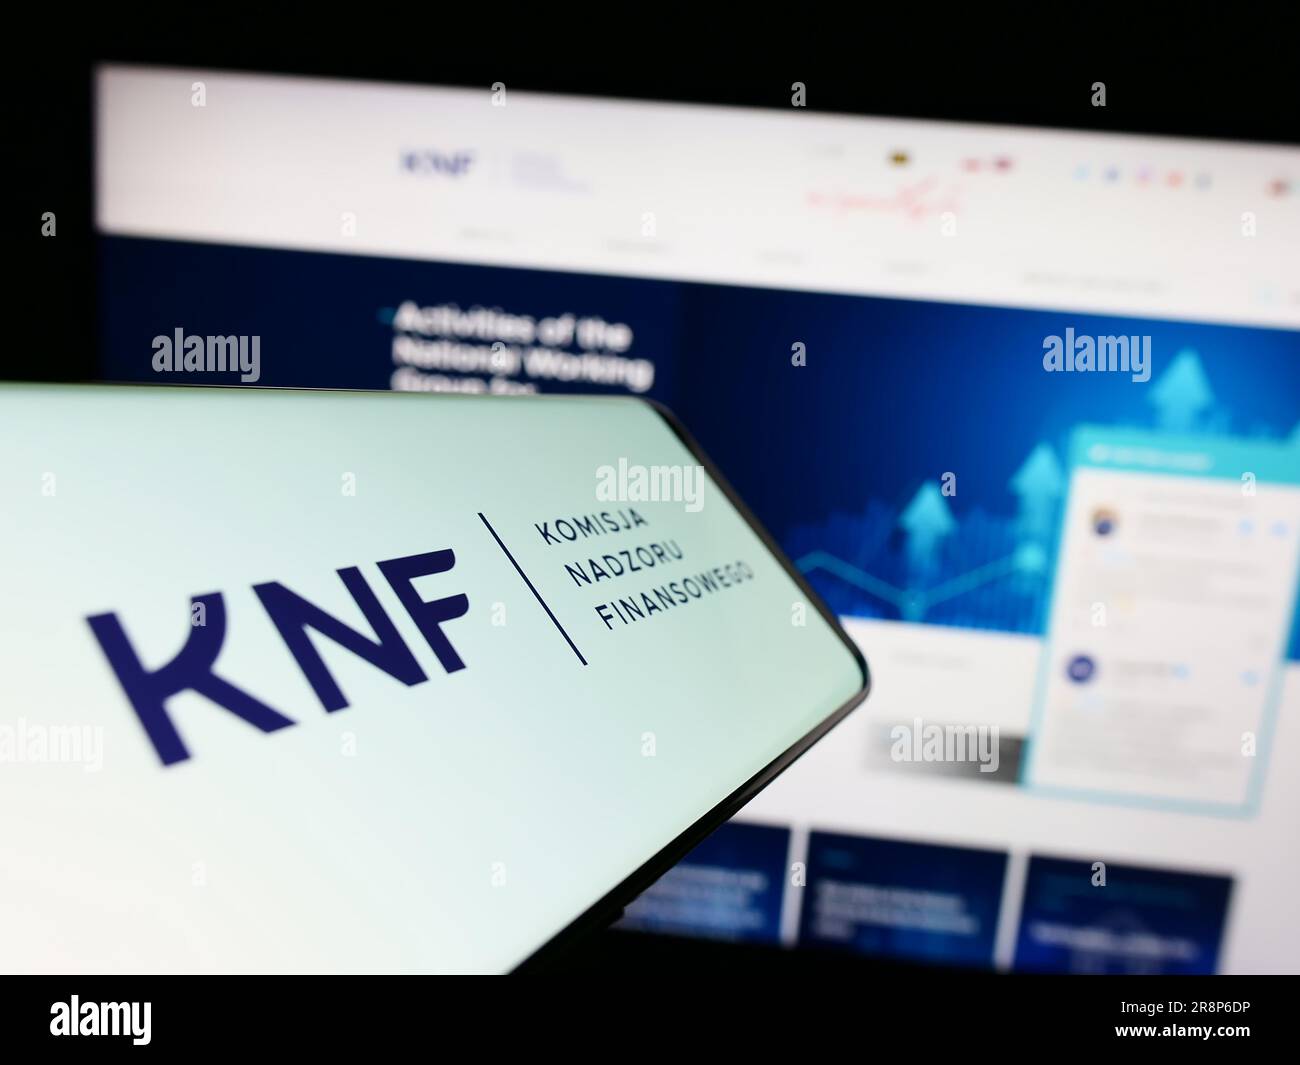 Mobile phone with logo of authority Komisja Nadzoru Finansowego (KNF) on screen in front of website. Focus on center-right of phone display. Stock Photo